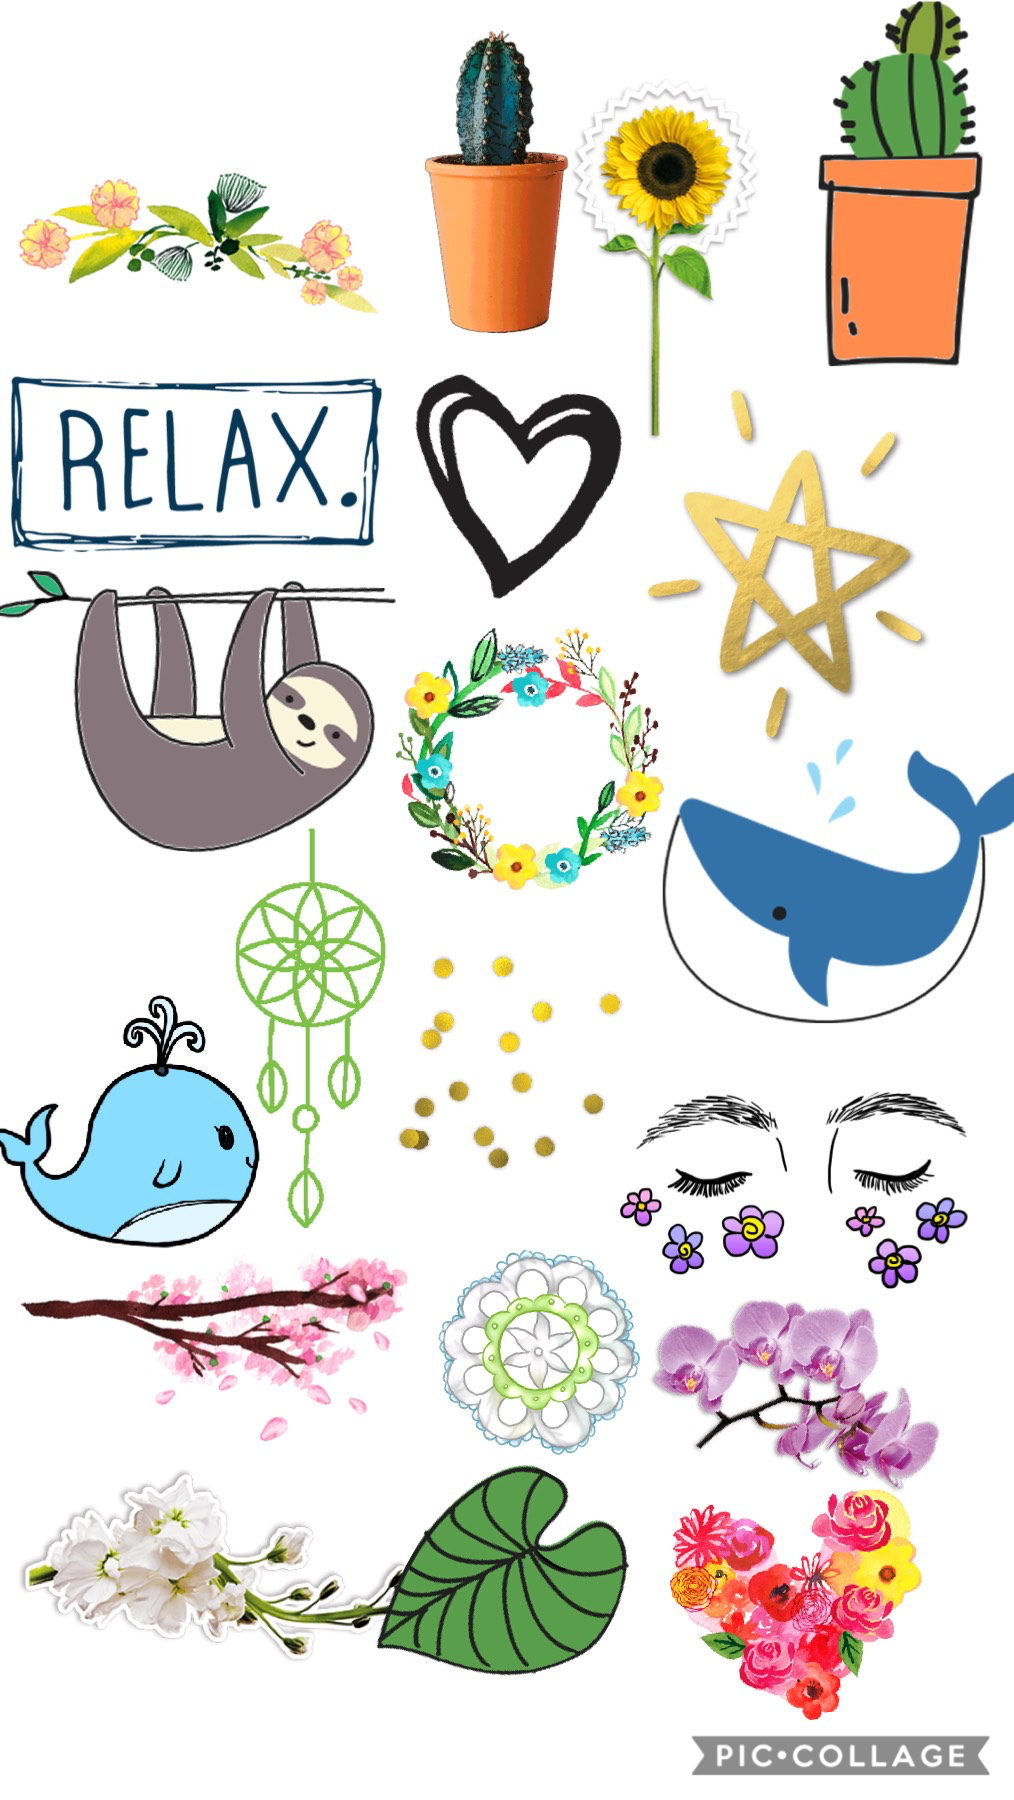 Bored so here slate some of my fave (free) stickers. ._.